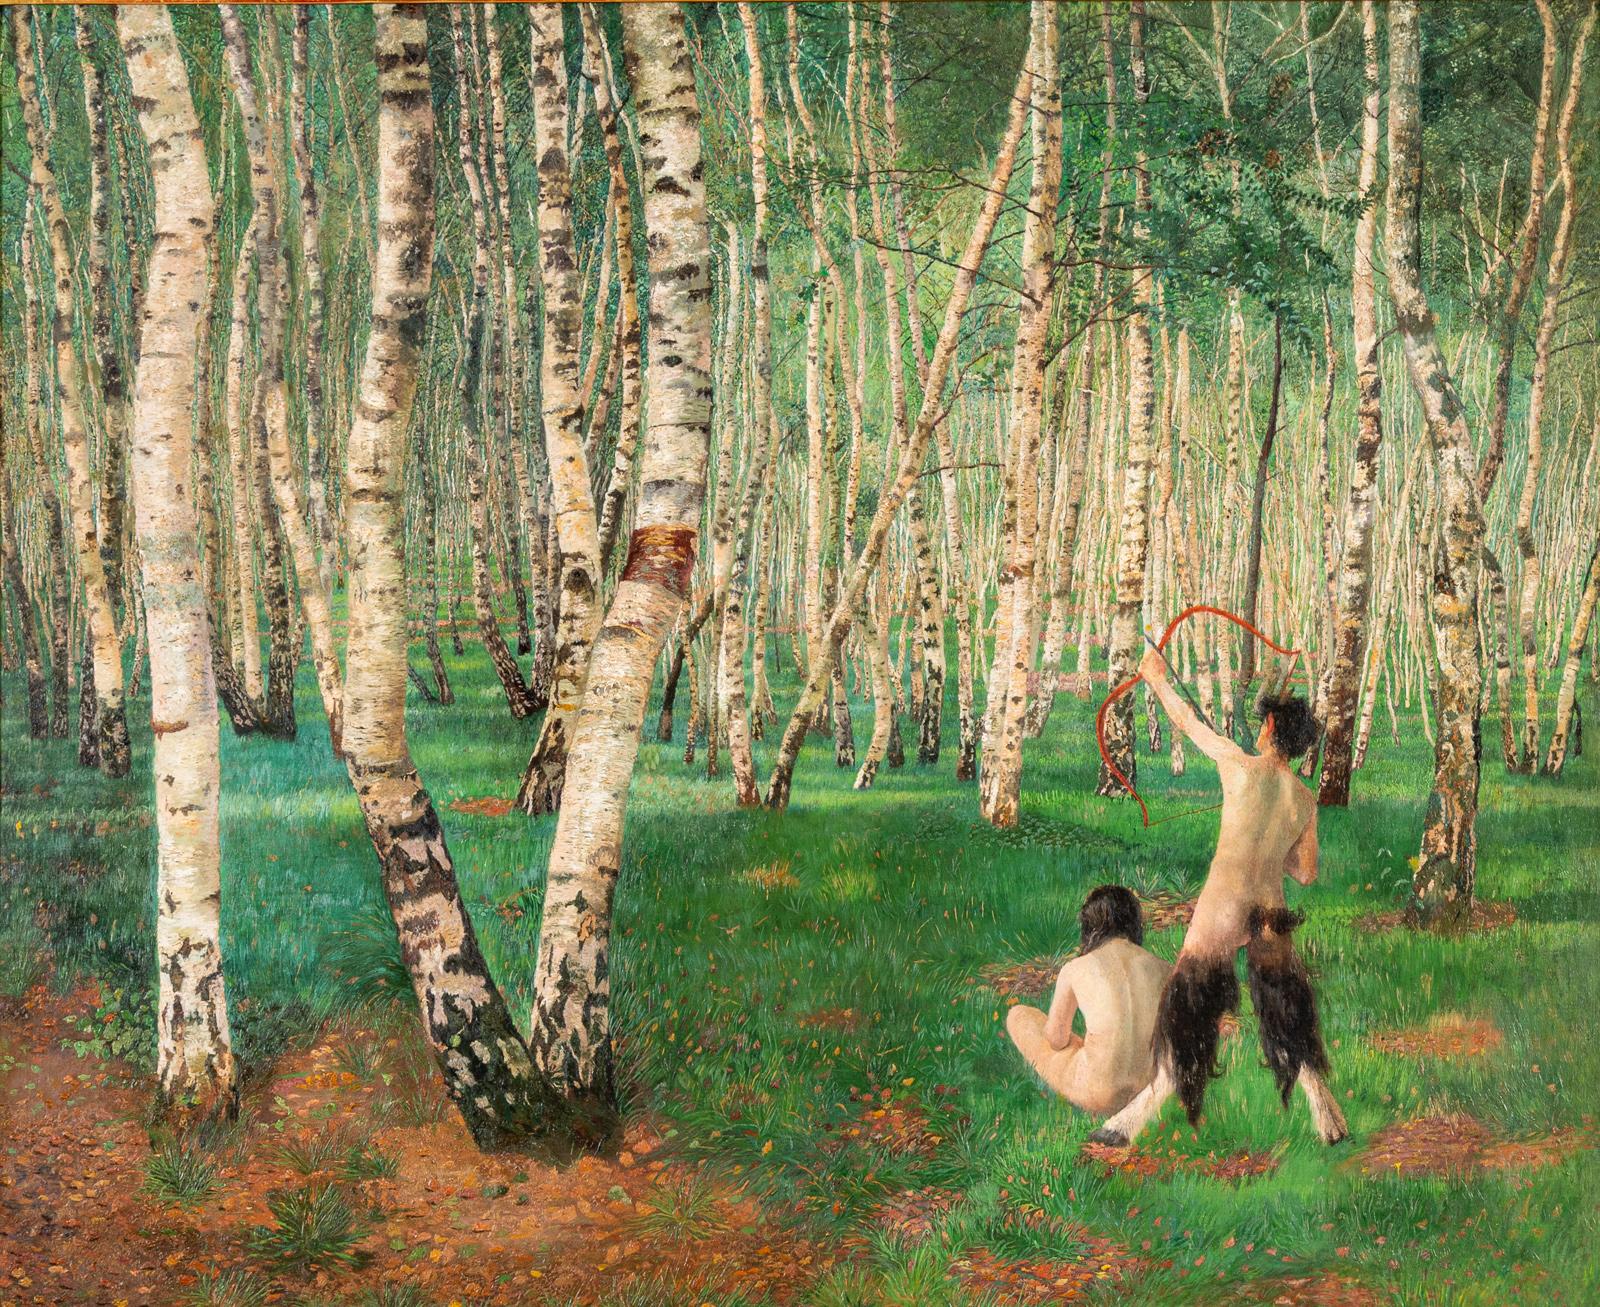 Landscape painting oil on canvas Austrian Art Karl Mediz The Birch Forest 1894 Mythological nature painting

Karl Mediz, as well as his wife Emilie Mediz-Pelikan, occupy a singular position in Austrian classical modernist painting, at the